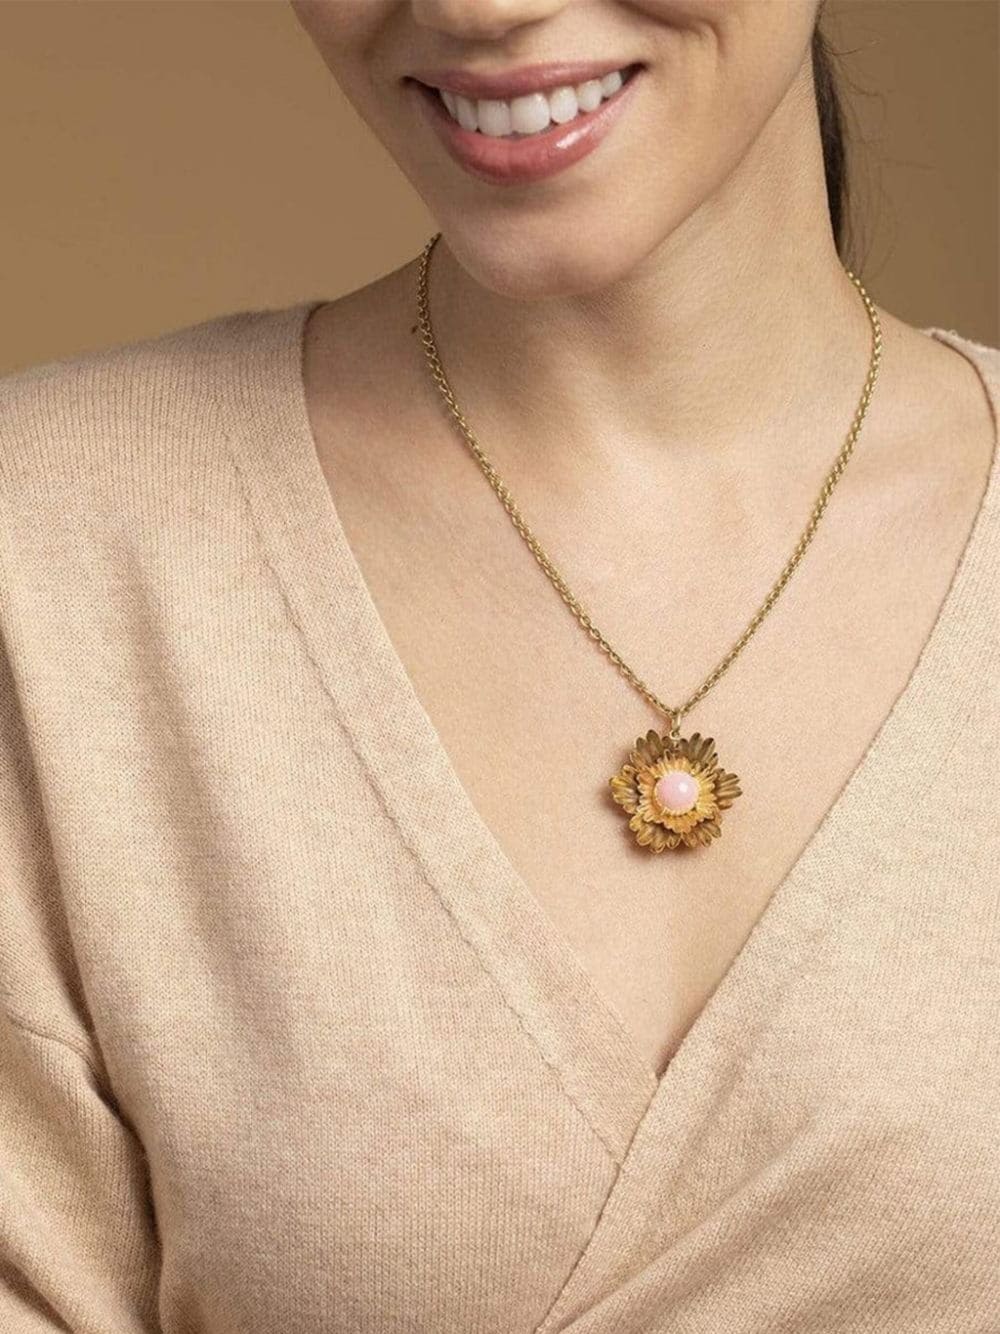 Shop Irene Neuwirth 18kt Yellow Gold Super Bloom Opal Necklace